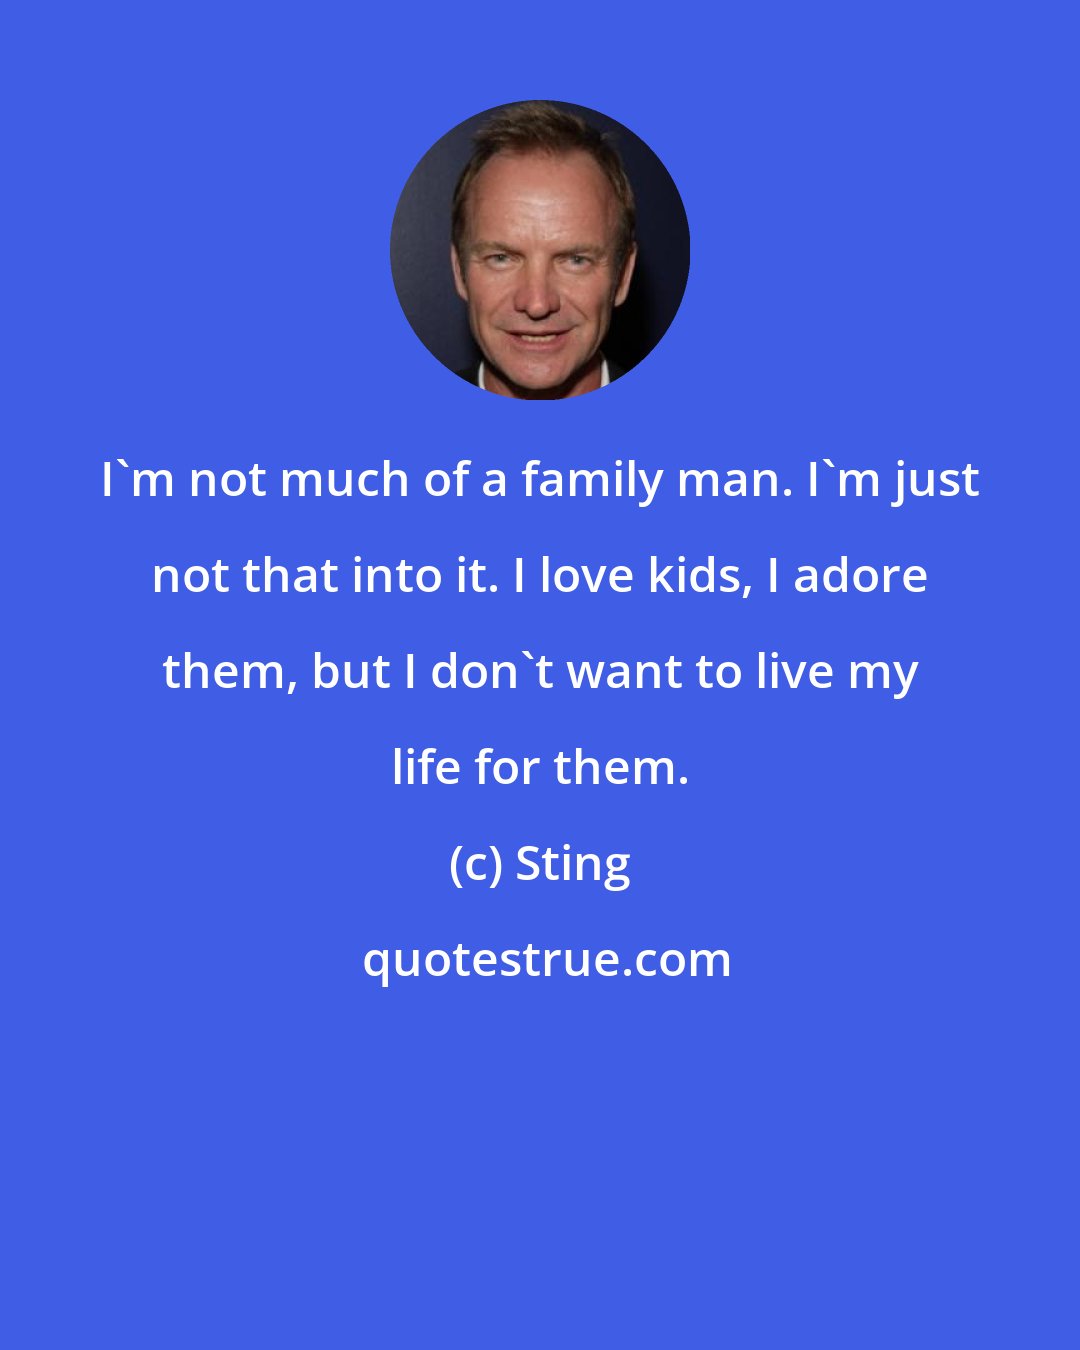 Sting: I'm not much of a family man. I'm just not that into it. I love kids, I adore them, but I don't want to live my life for them.